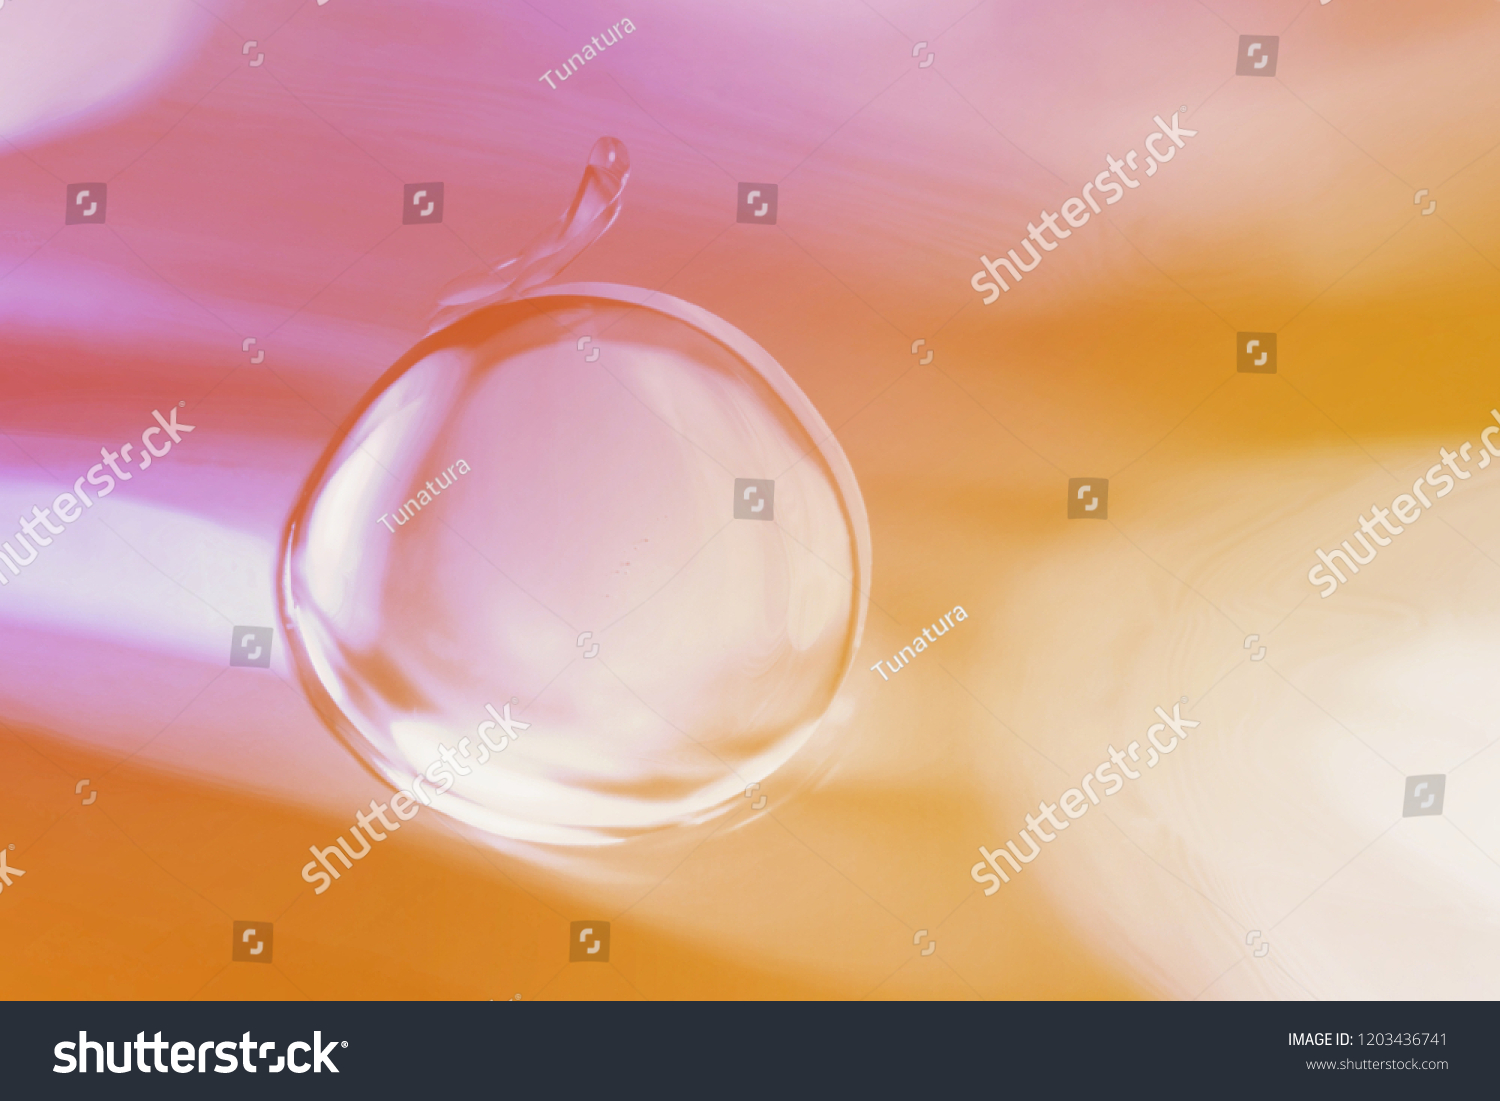 Abstract background, macro droplet of liquid, pastel colors #1203436741